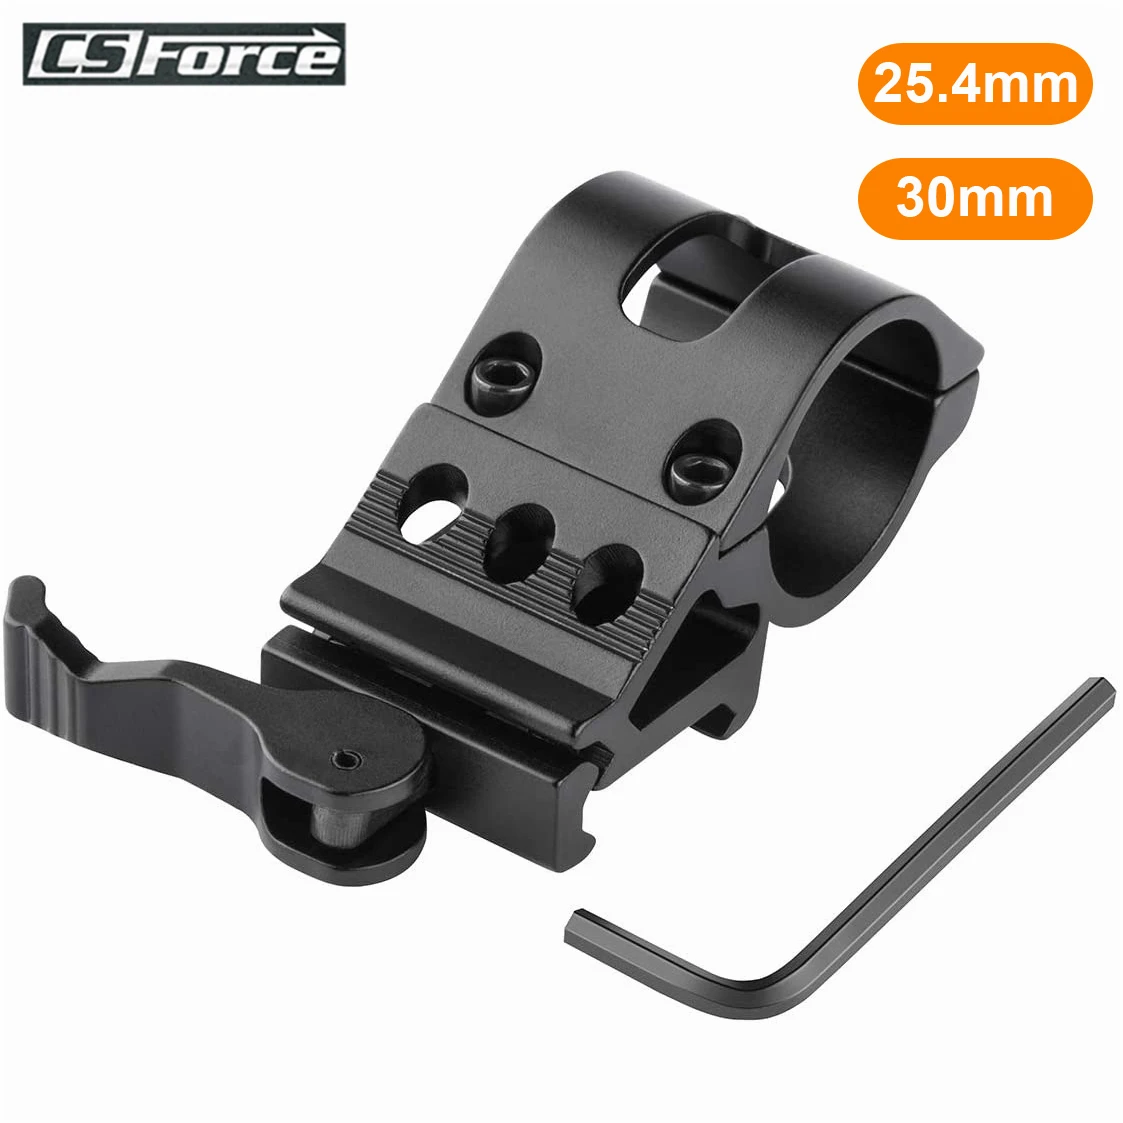 25.4mm/30mm Quick Release Offset Flashlight Scope Mount for 20mm Picatinnly Rail 45 Degree Scope Mount Hunting Gun Accessories